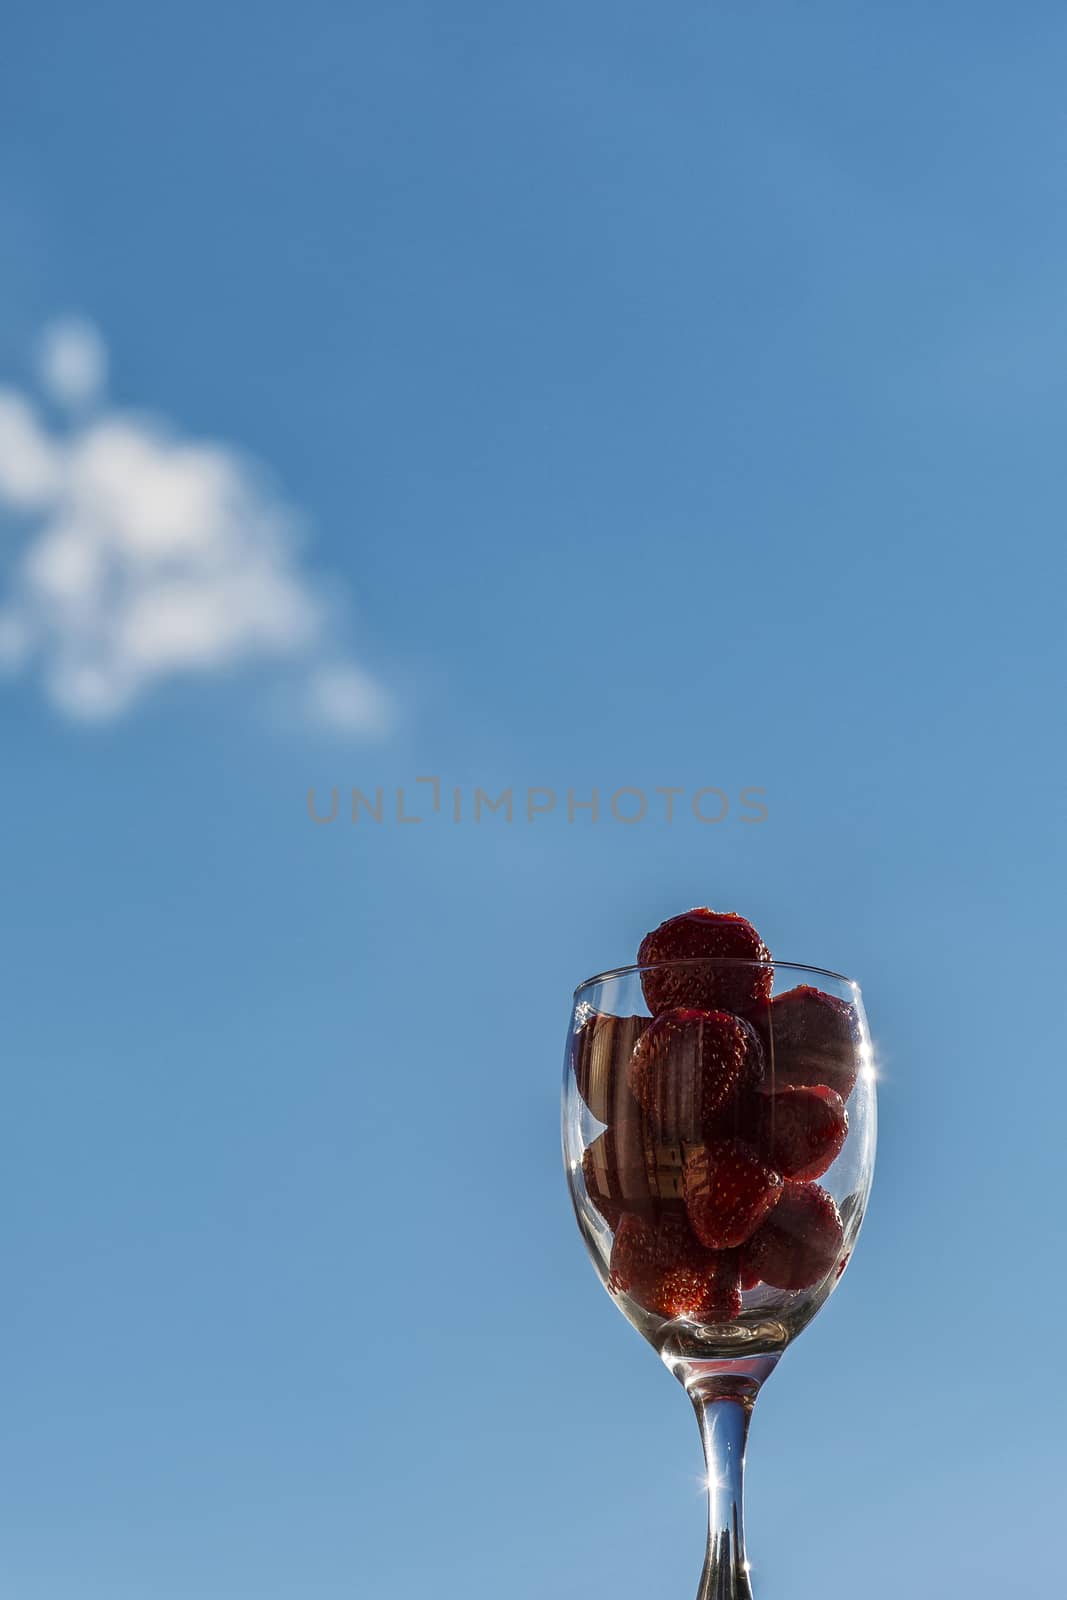 Strawberries in a glass against the blue sky by Grommik